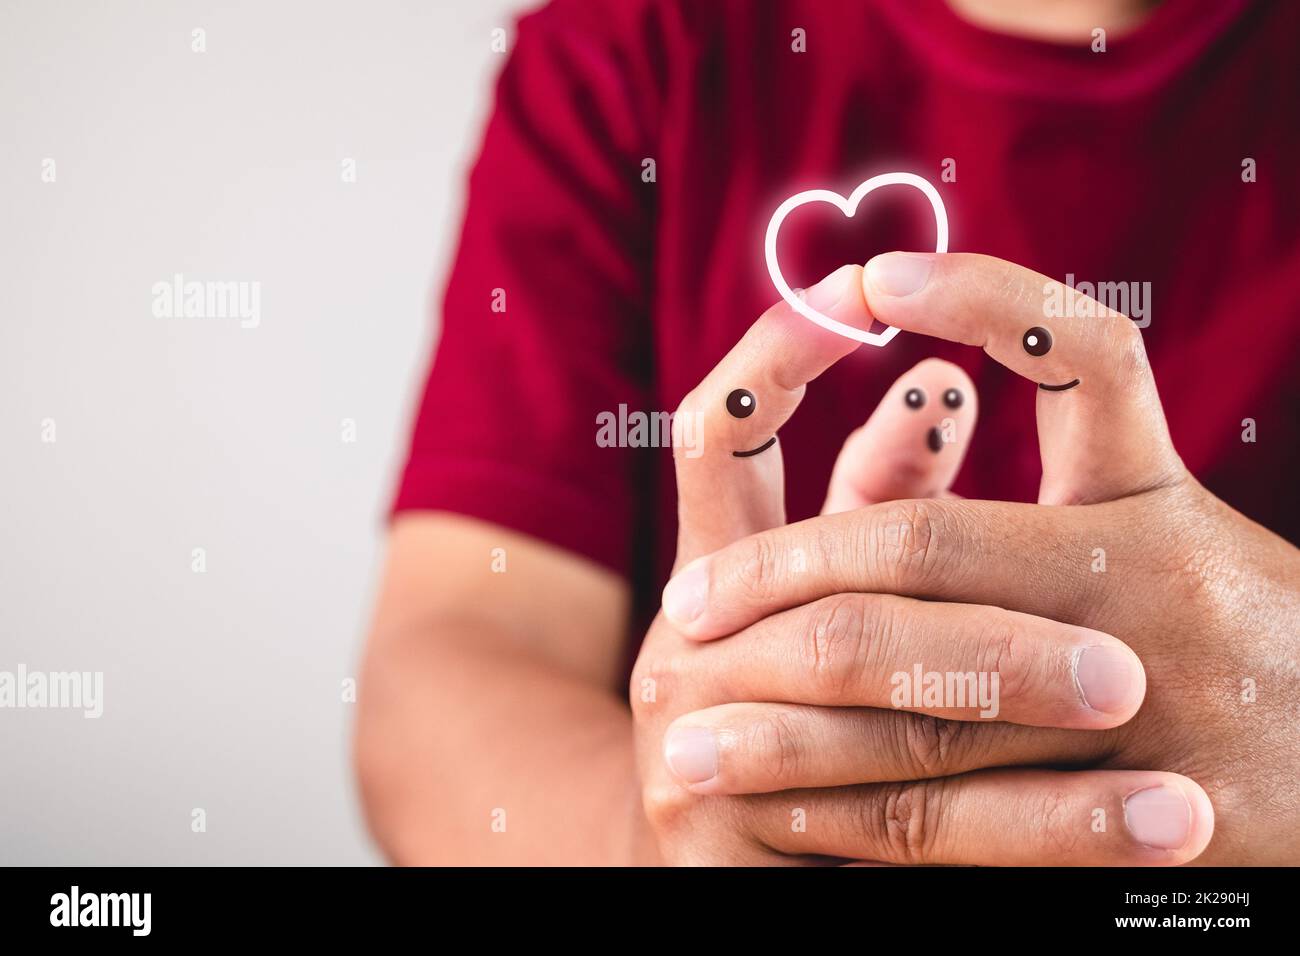 Art of love on Fingers. Hands join together. Kiss on tip of index. Valentine's day concept with copy space. Stock Photo